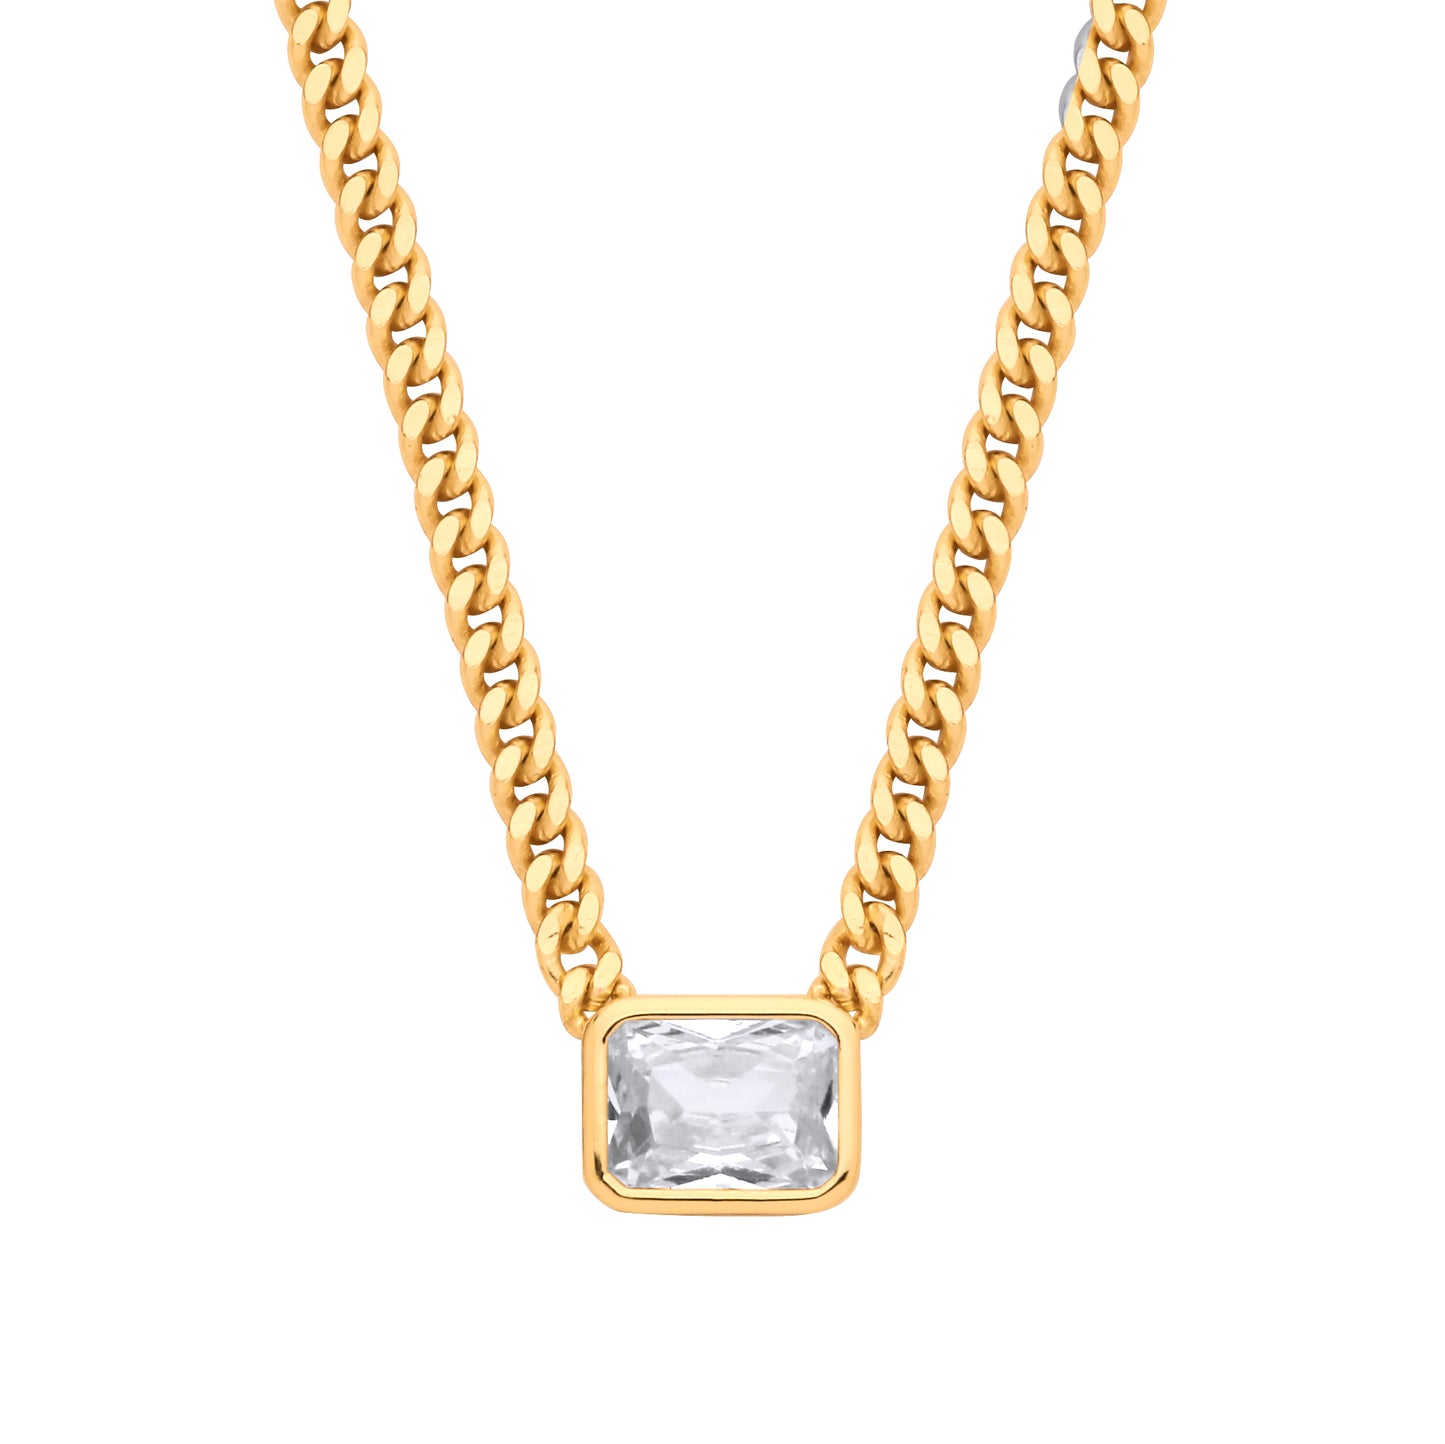 Gilded Silver  Solitaire Curb Lavalier Necklace 3mm 16" + 1.5" - GVK499G